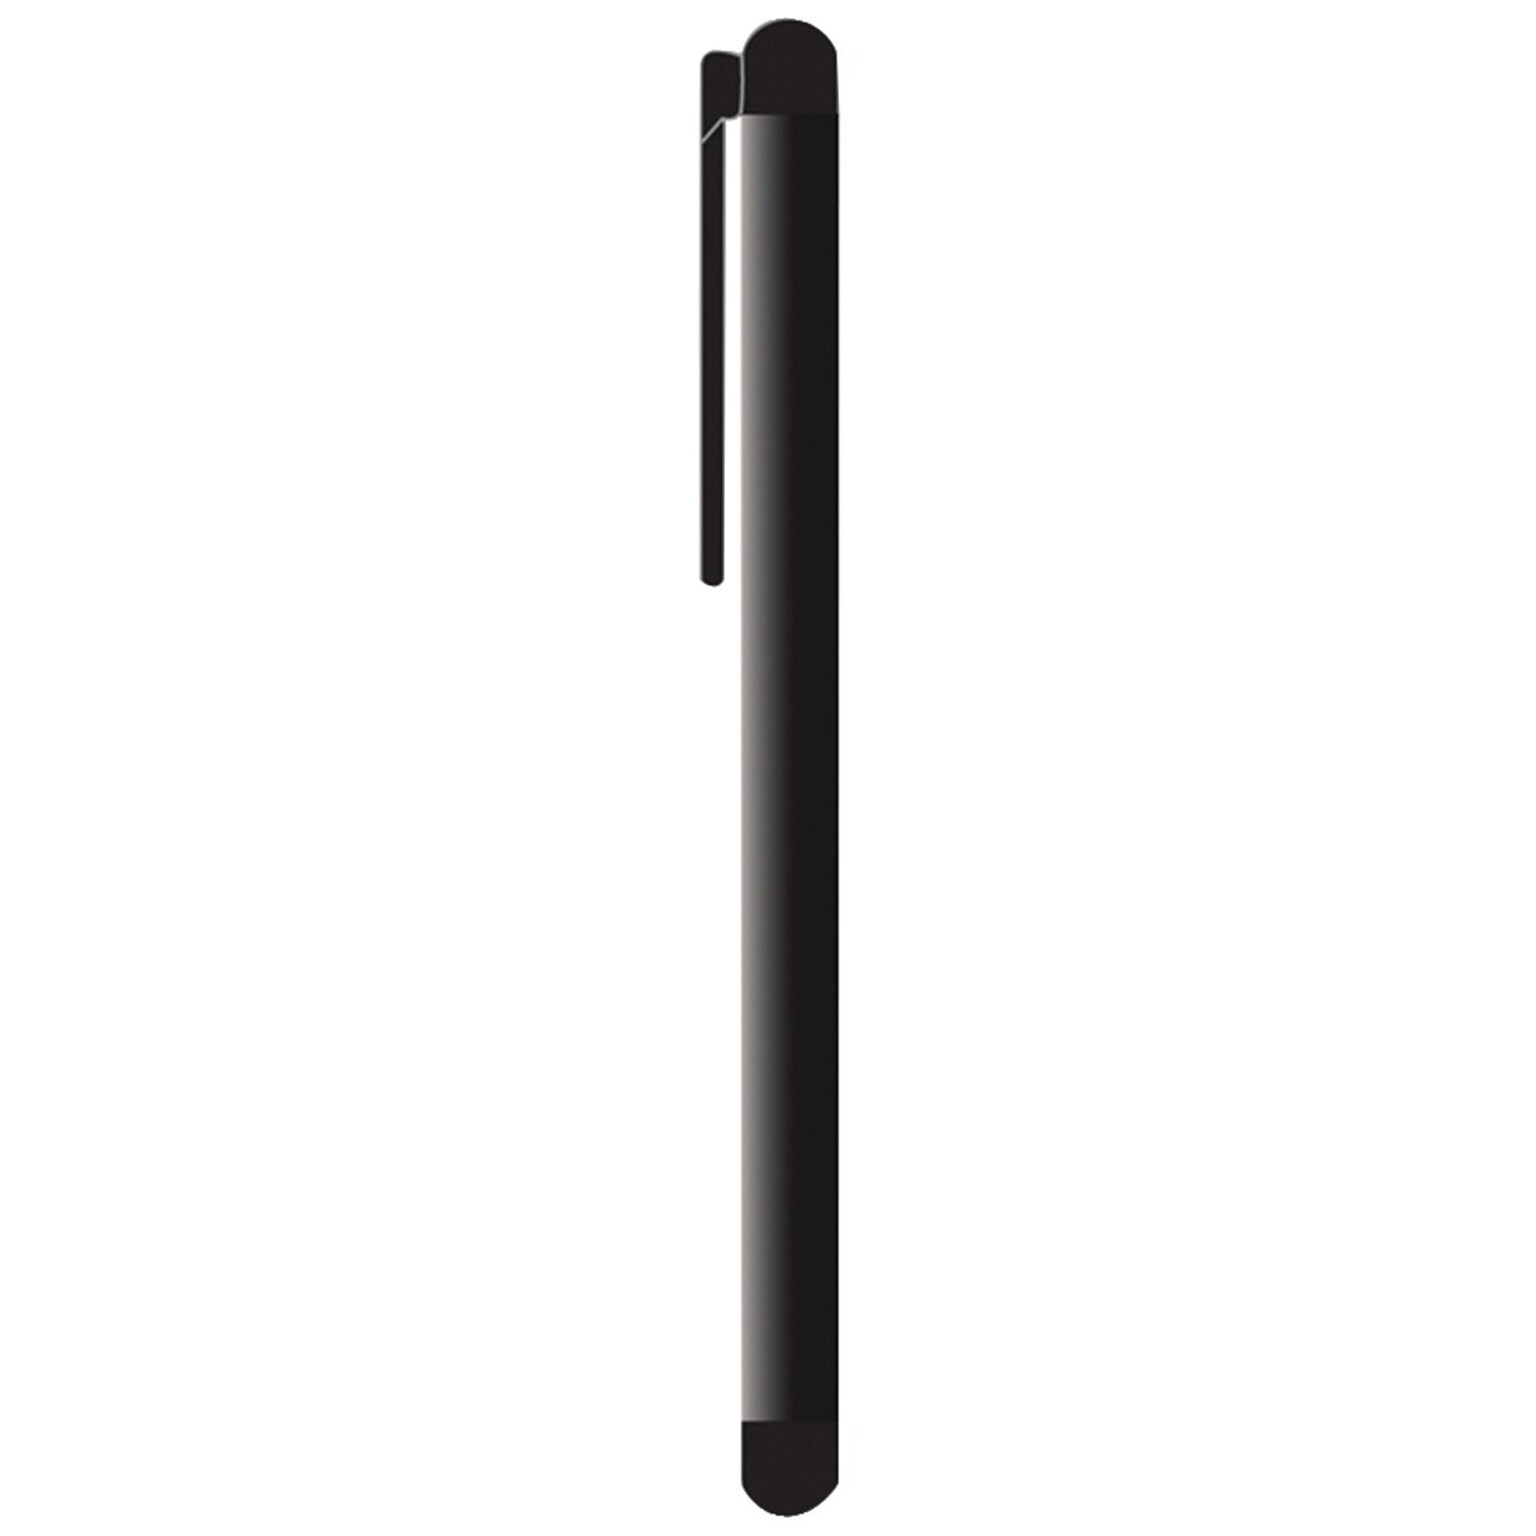 Iessentials Universal Stylus For iPad And Touch-Screen Devices, Black